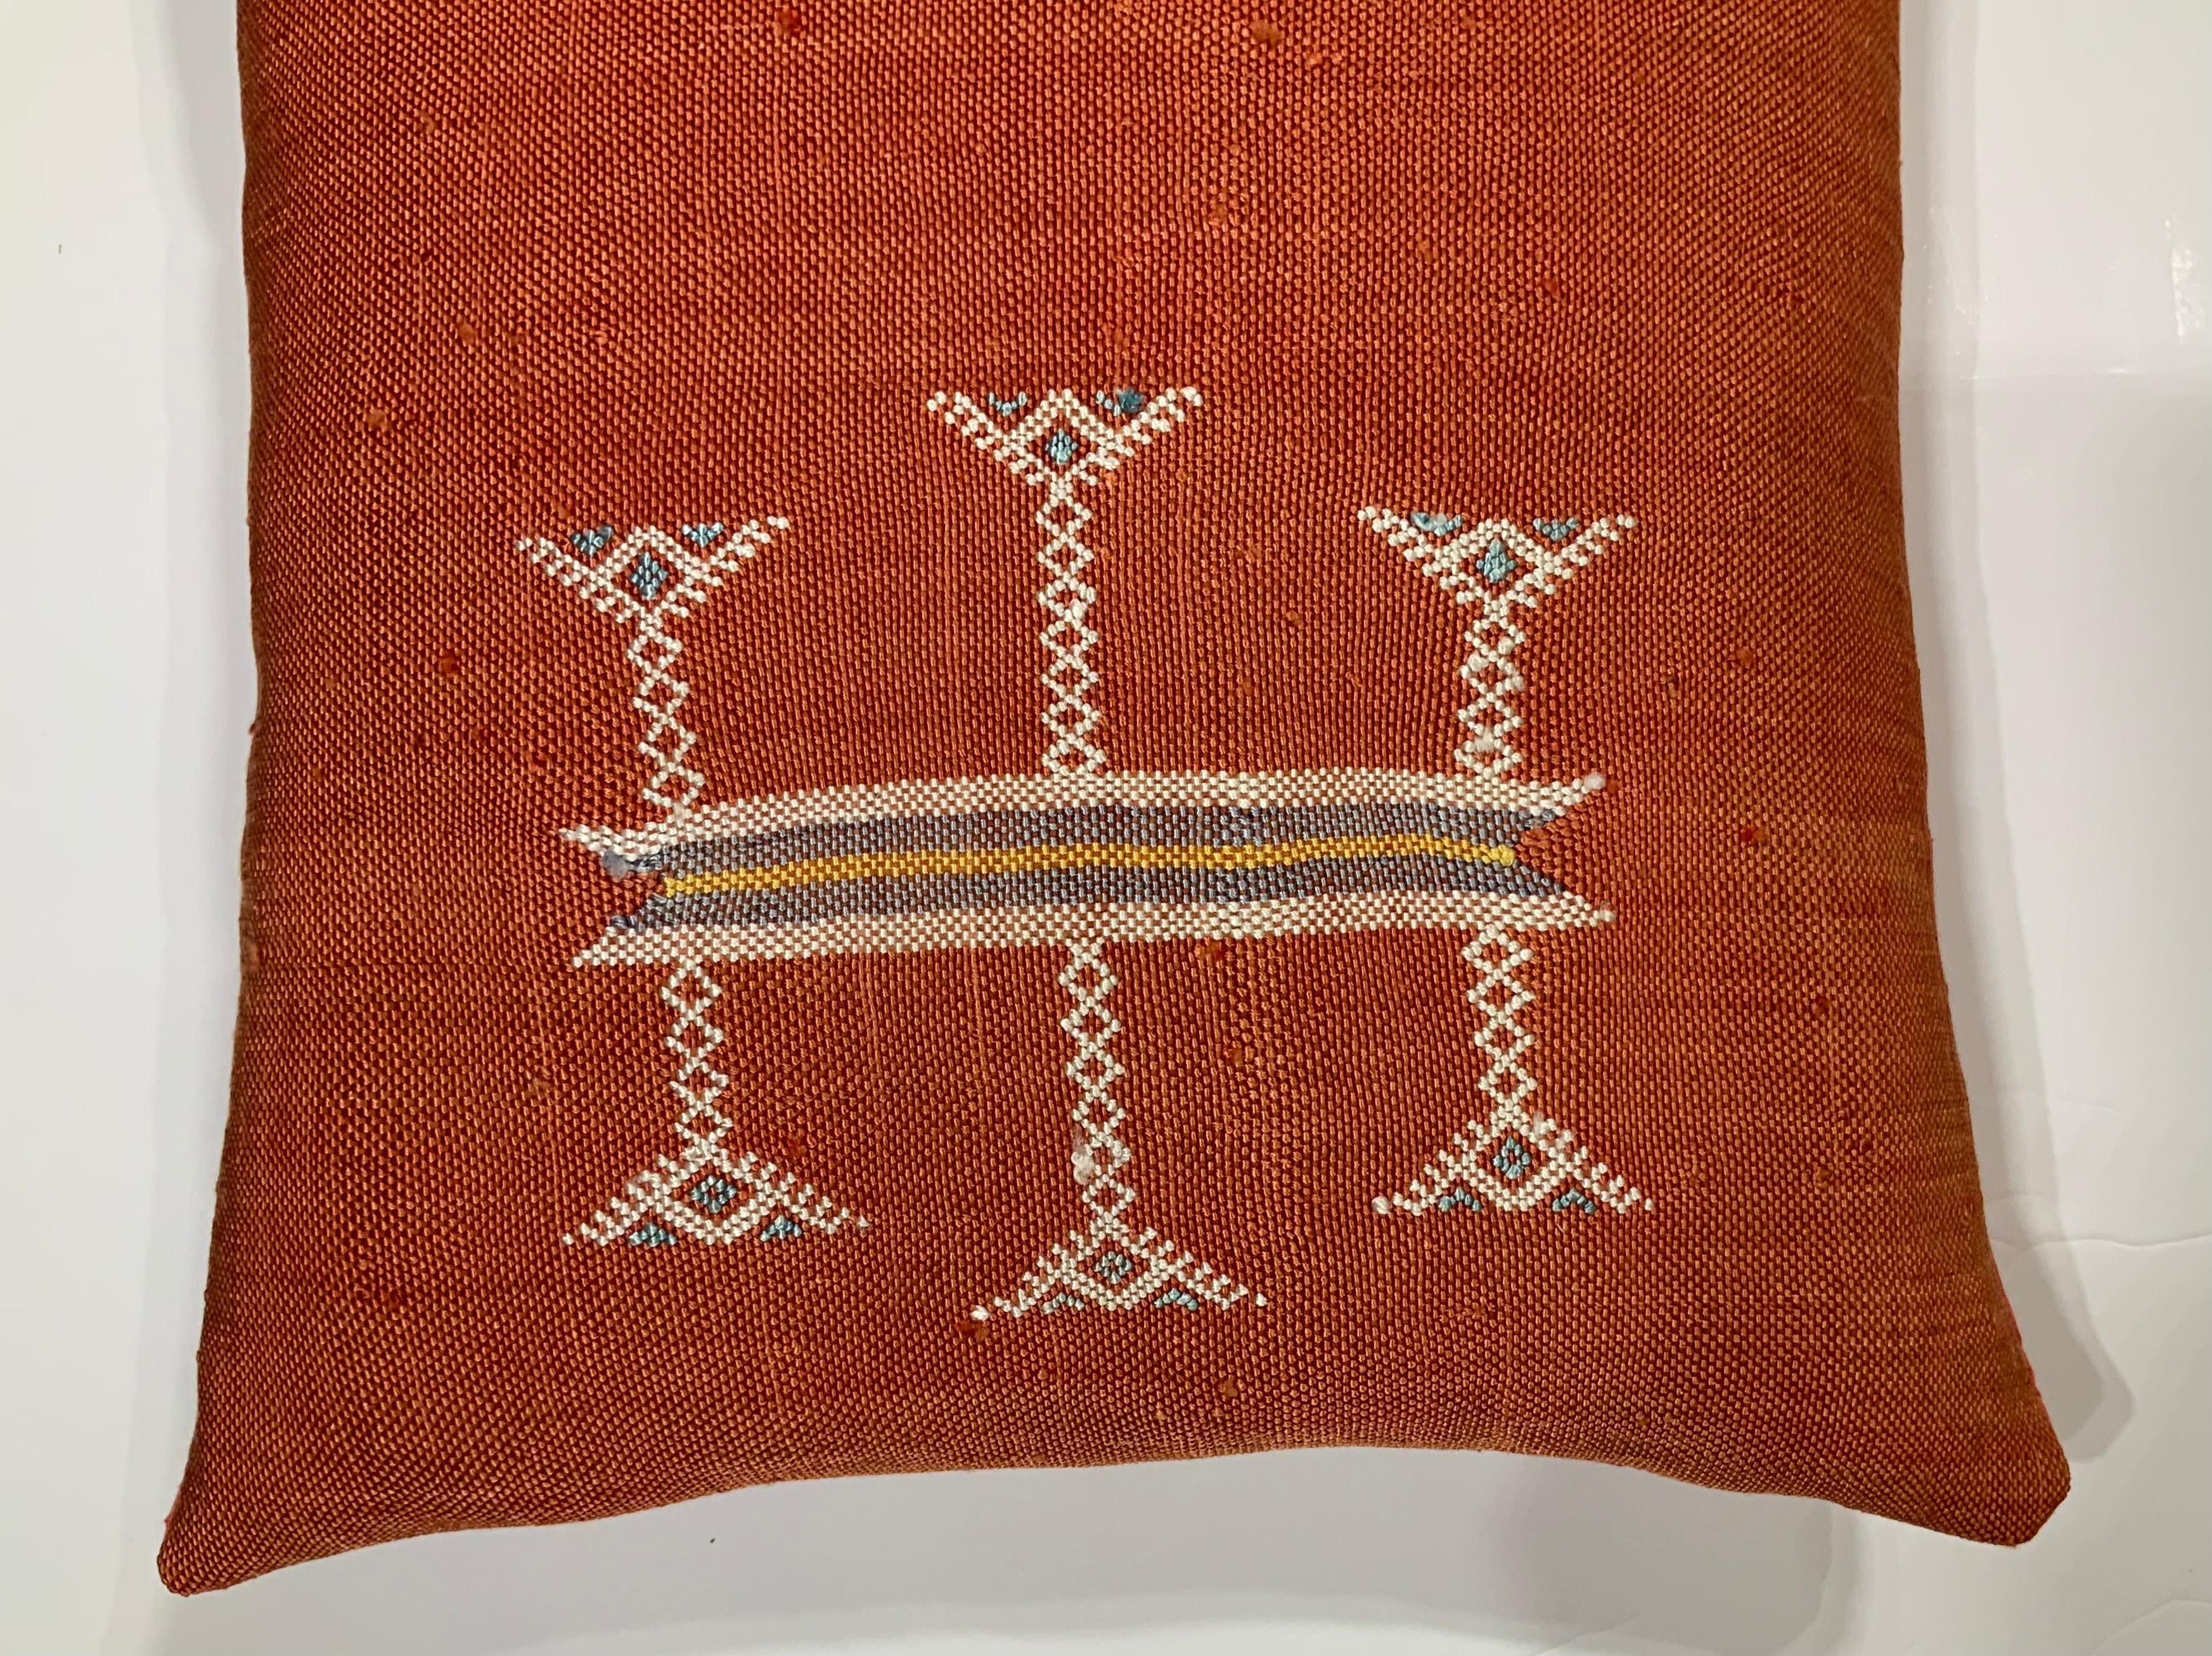 Beautiful pillow made of handwoven flat-weave textile with multi colors geometric motifs on a red background, fine silk backing, fresh new insert.